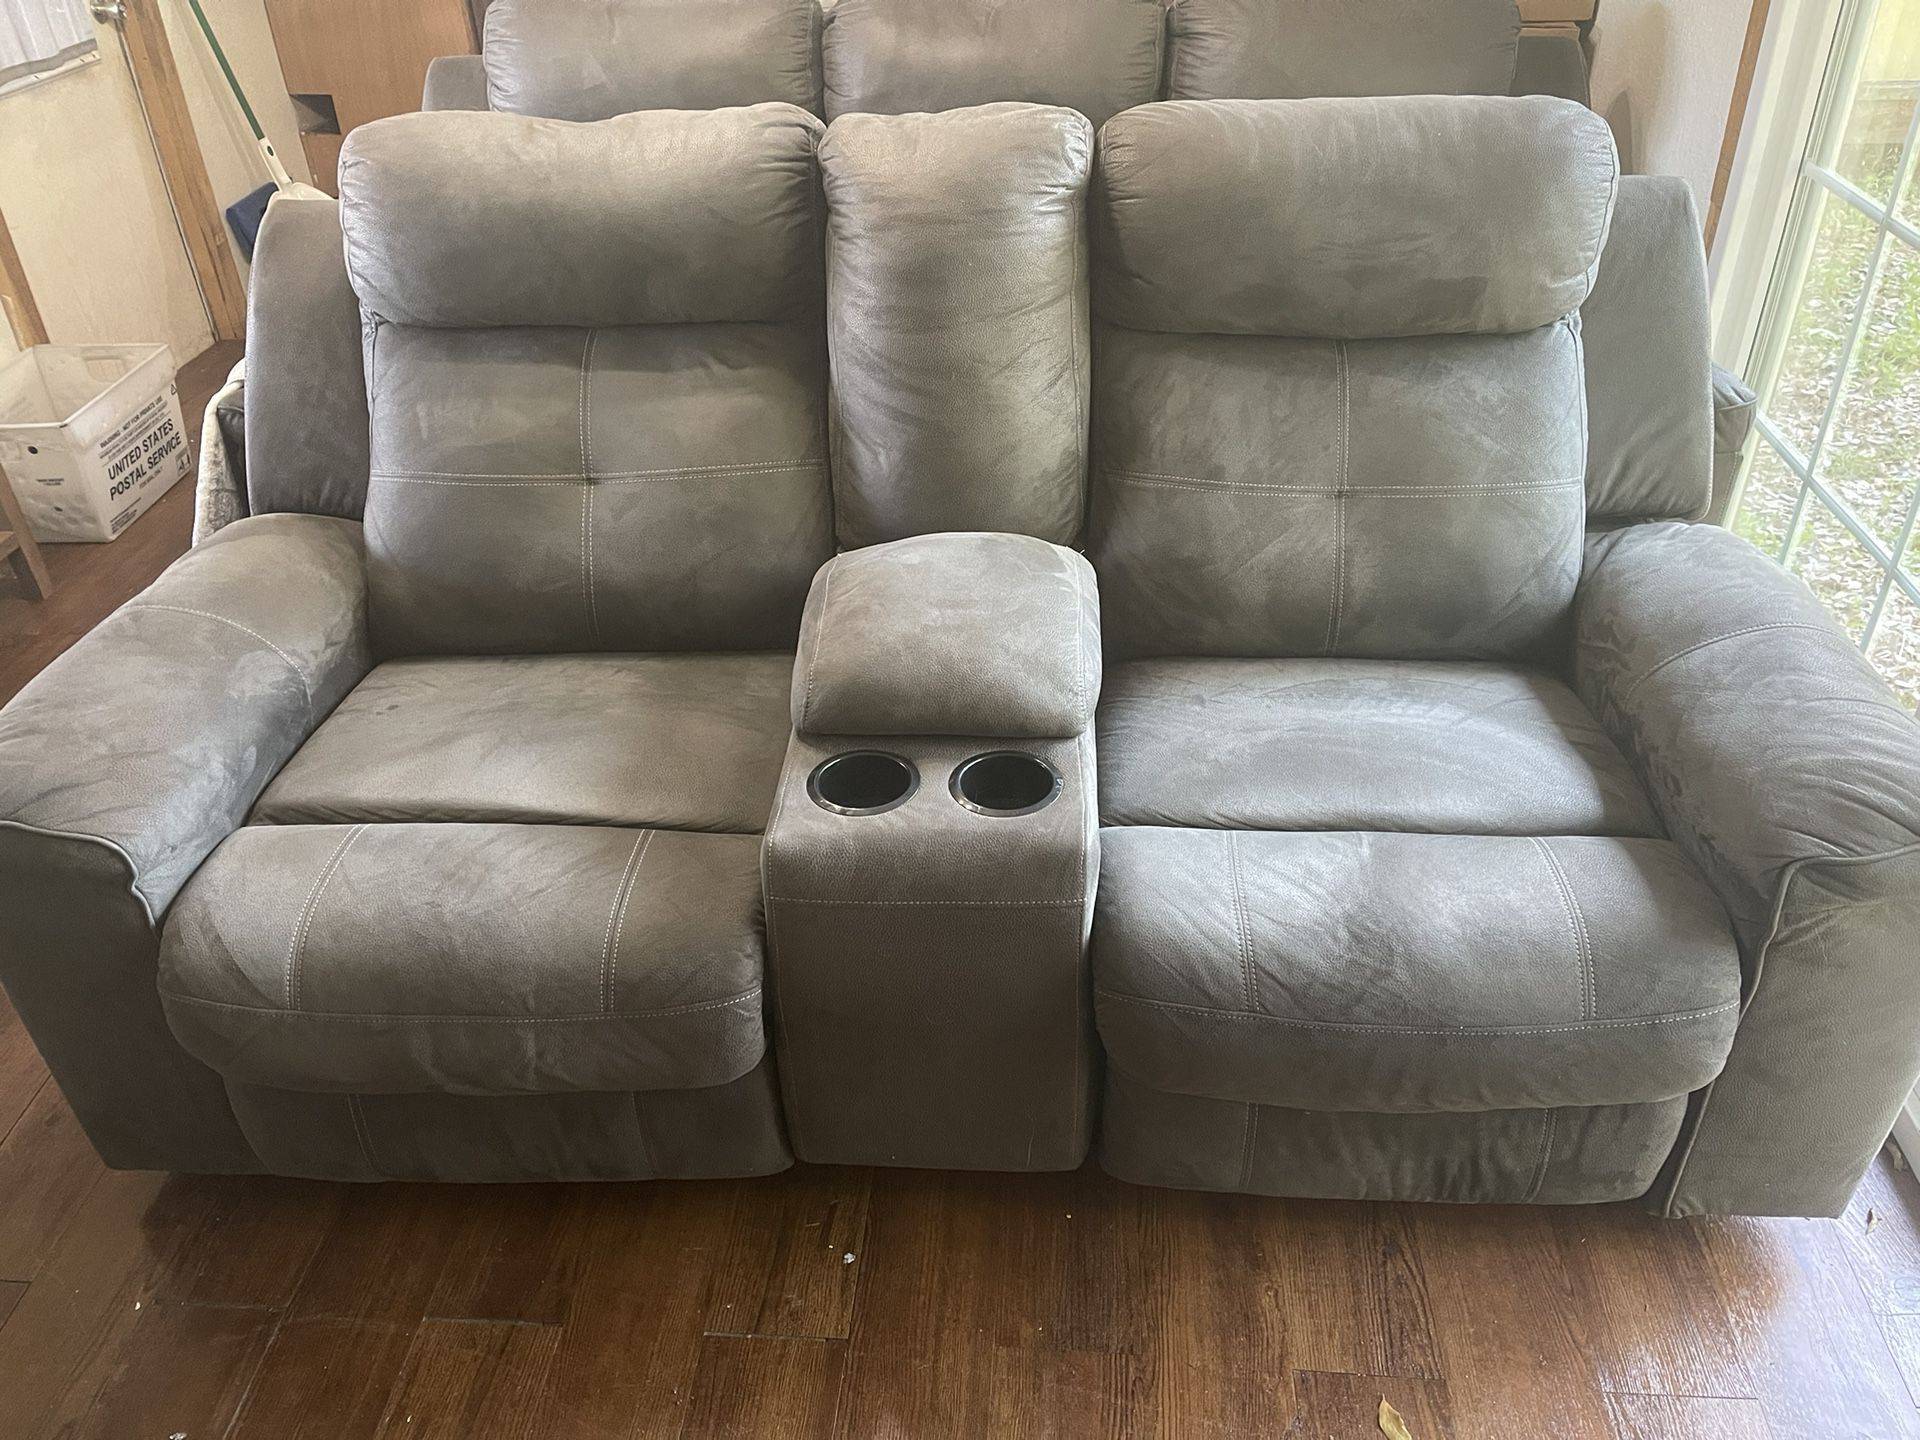 Reclining Sofa And Reclining Love Seat With Cup holders And Storage 